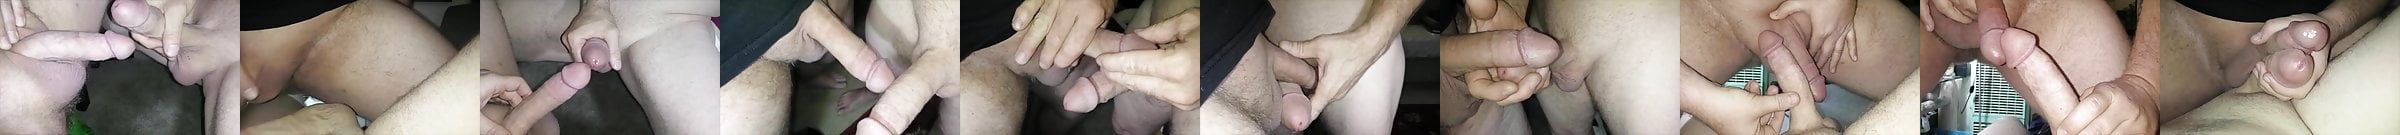 2 Delicious Cocks Cumming On Each Other Free Gay Hd Porn 16